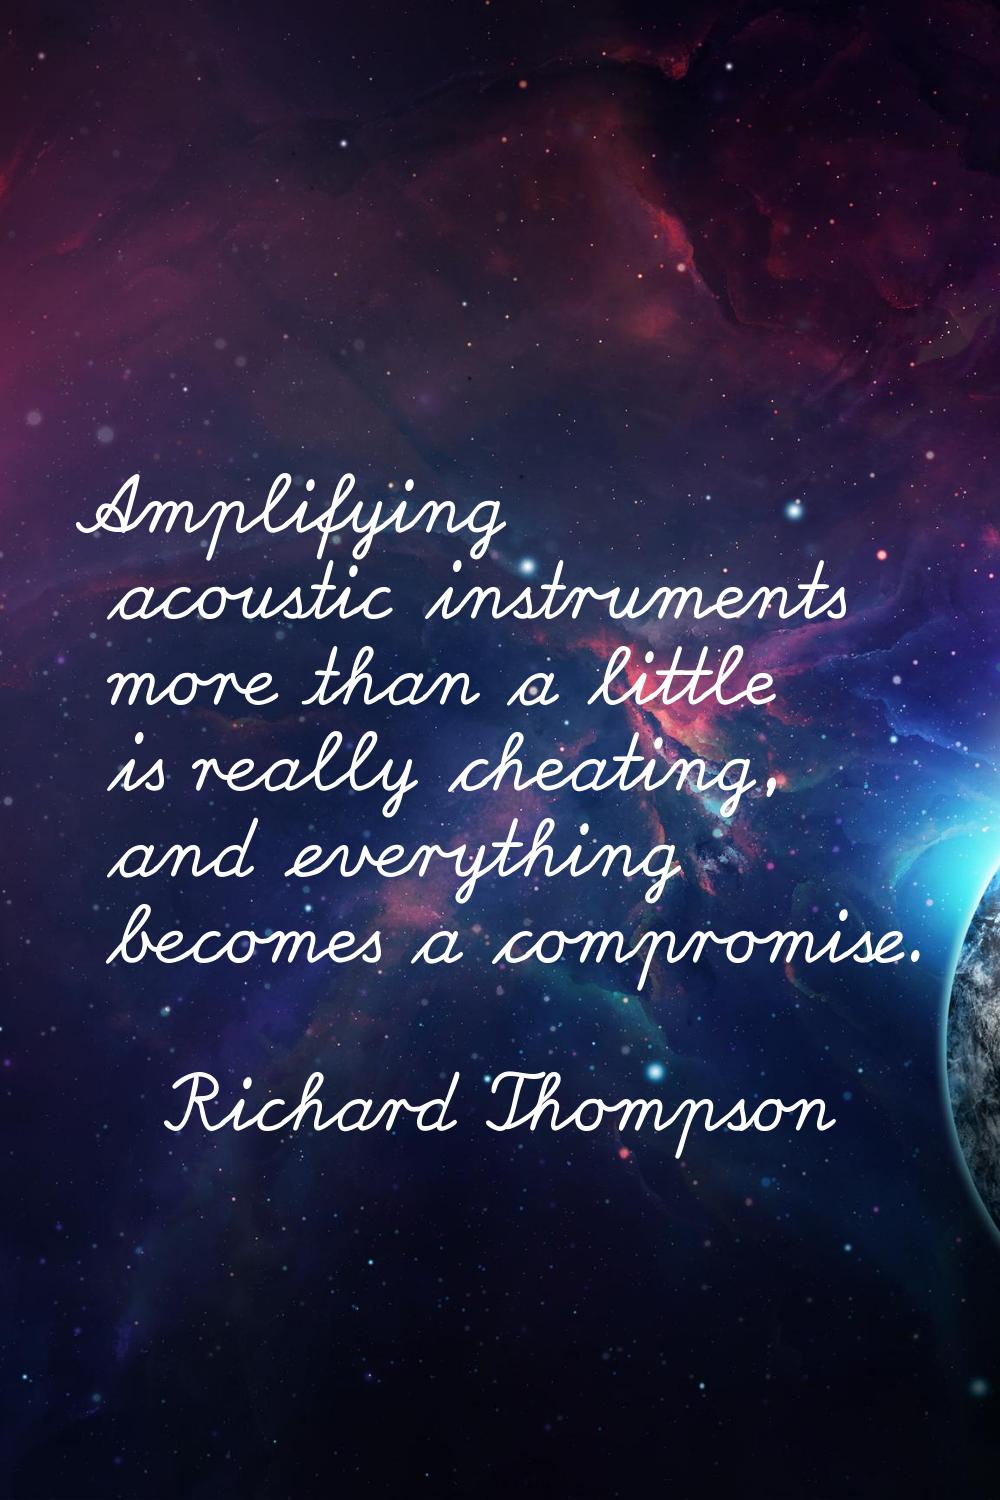 Amplifying acoustic instruments more than a little is really cheating, and everything becomes a com